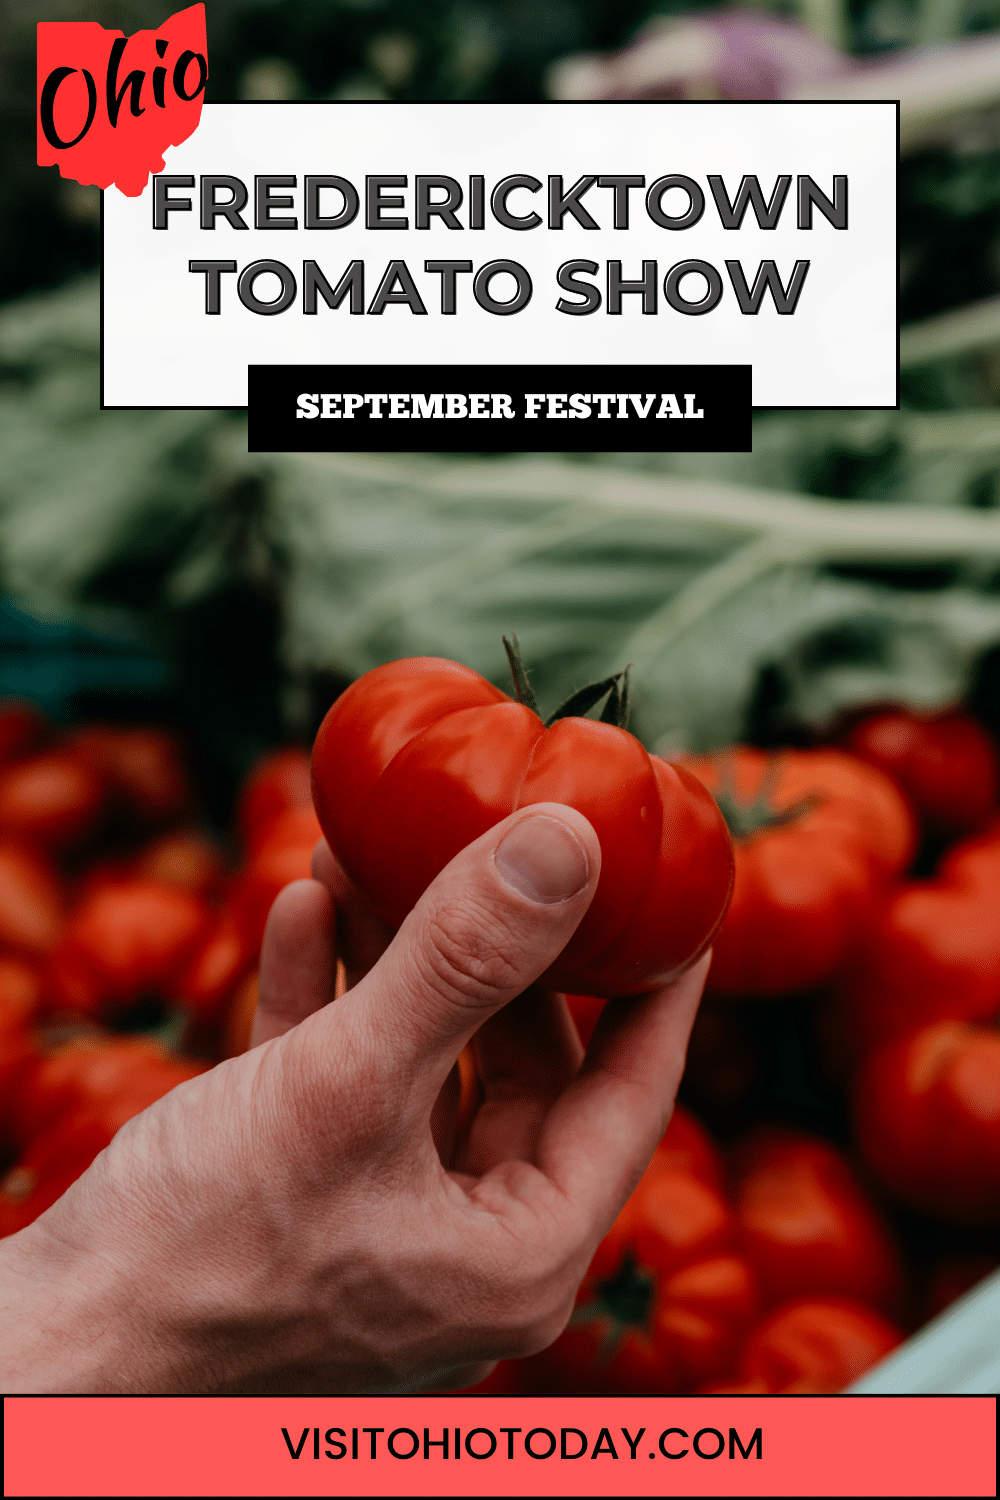 The Fredericktown Tomato Show is an annual street fair, taking place from the first Wednesday through Saturday after Labor Day each year.